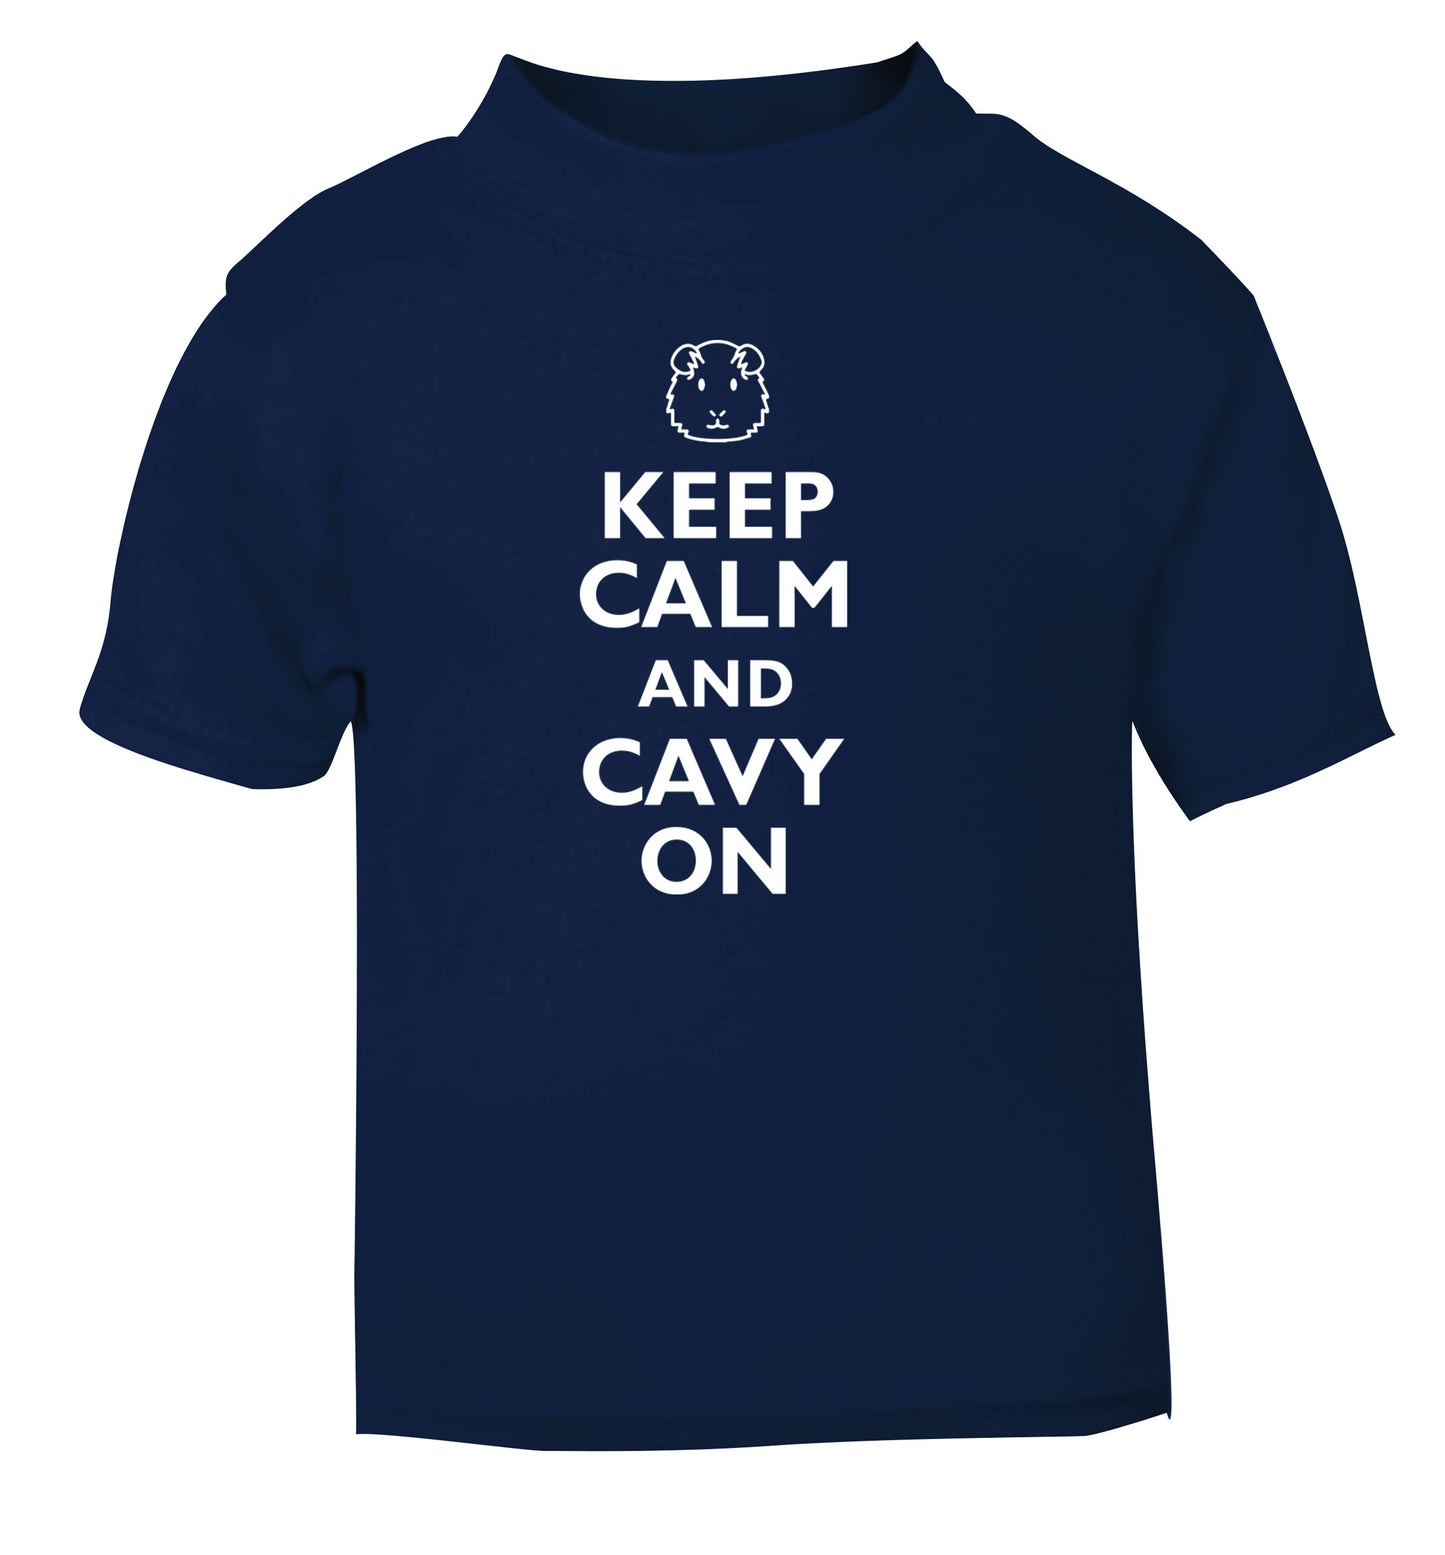 Keep calm and cavvy on navy Baby Toddler Tshirt 2 Years